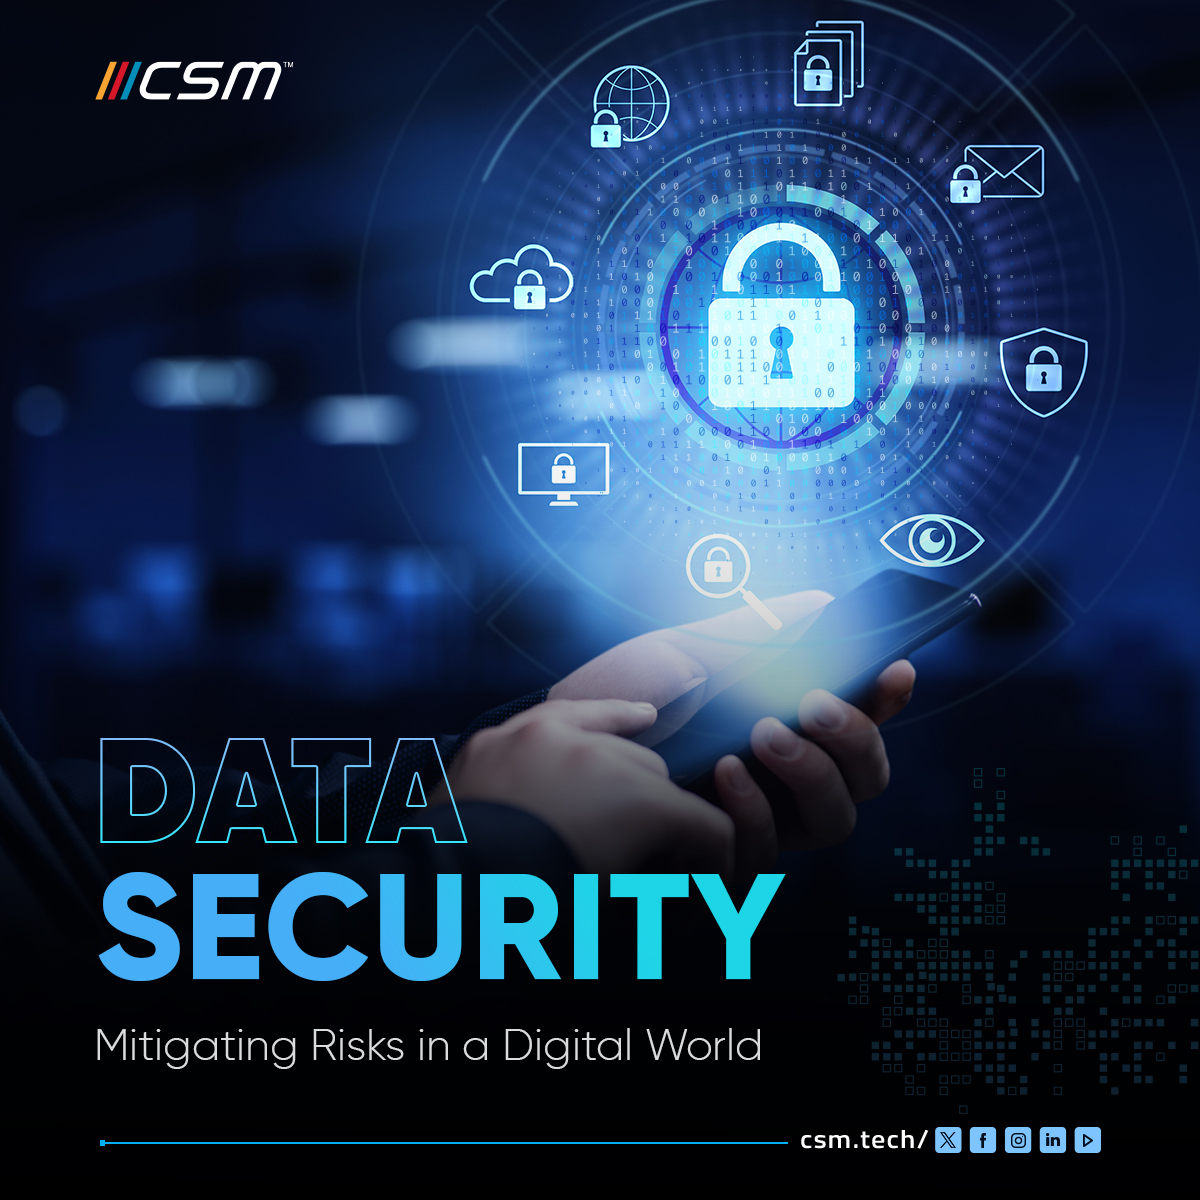 Secure your data with advanced protocols against digital threats. 👉Know More: bit.ly/4dK712b #CSMTech #DataSecurity #CyberSecurity #DataProtection #CyberDefense